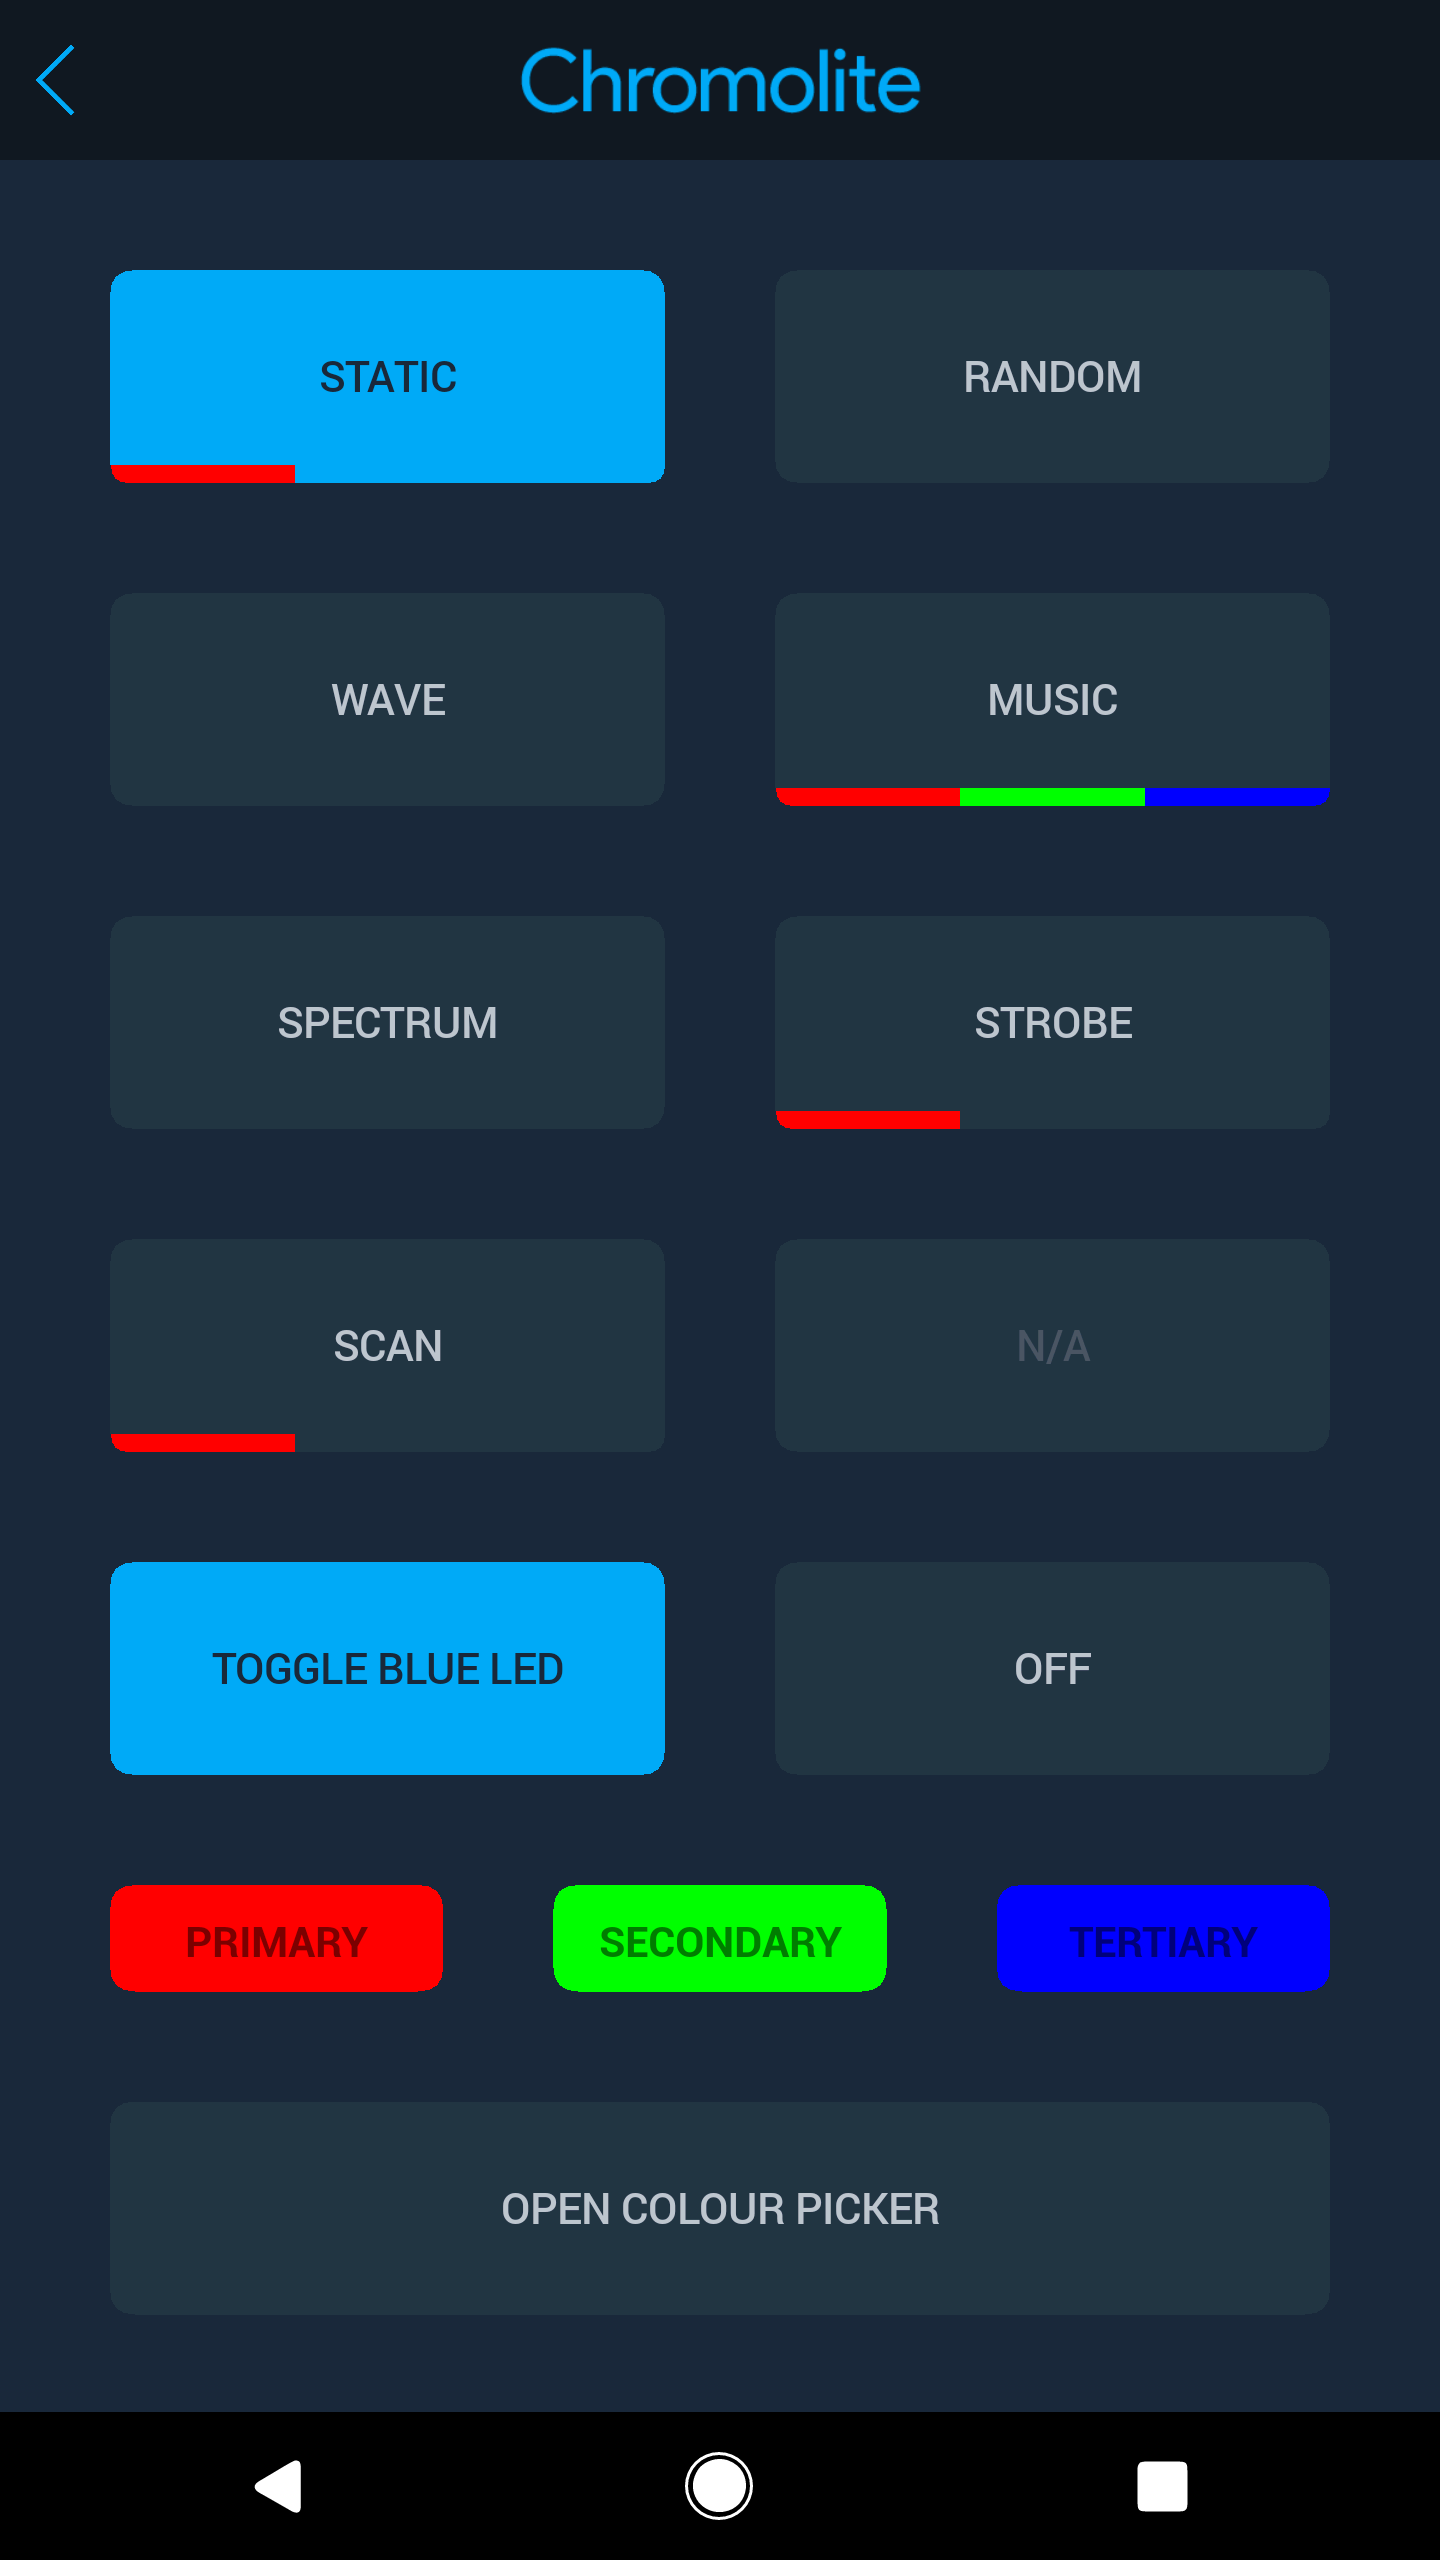 chromolite_android_main_ui.png